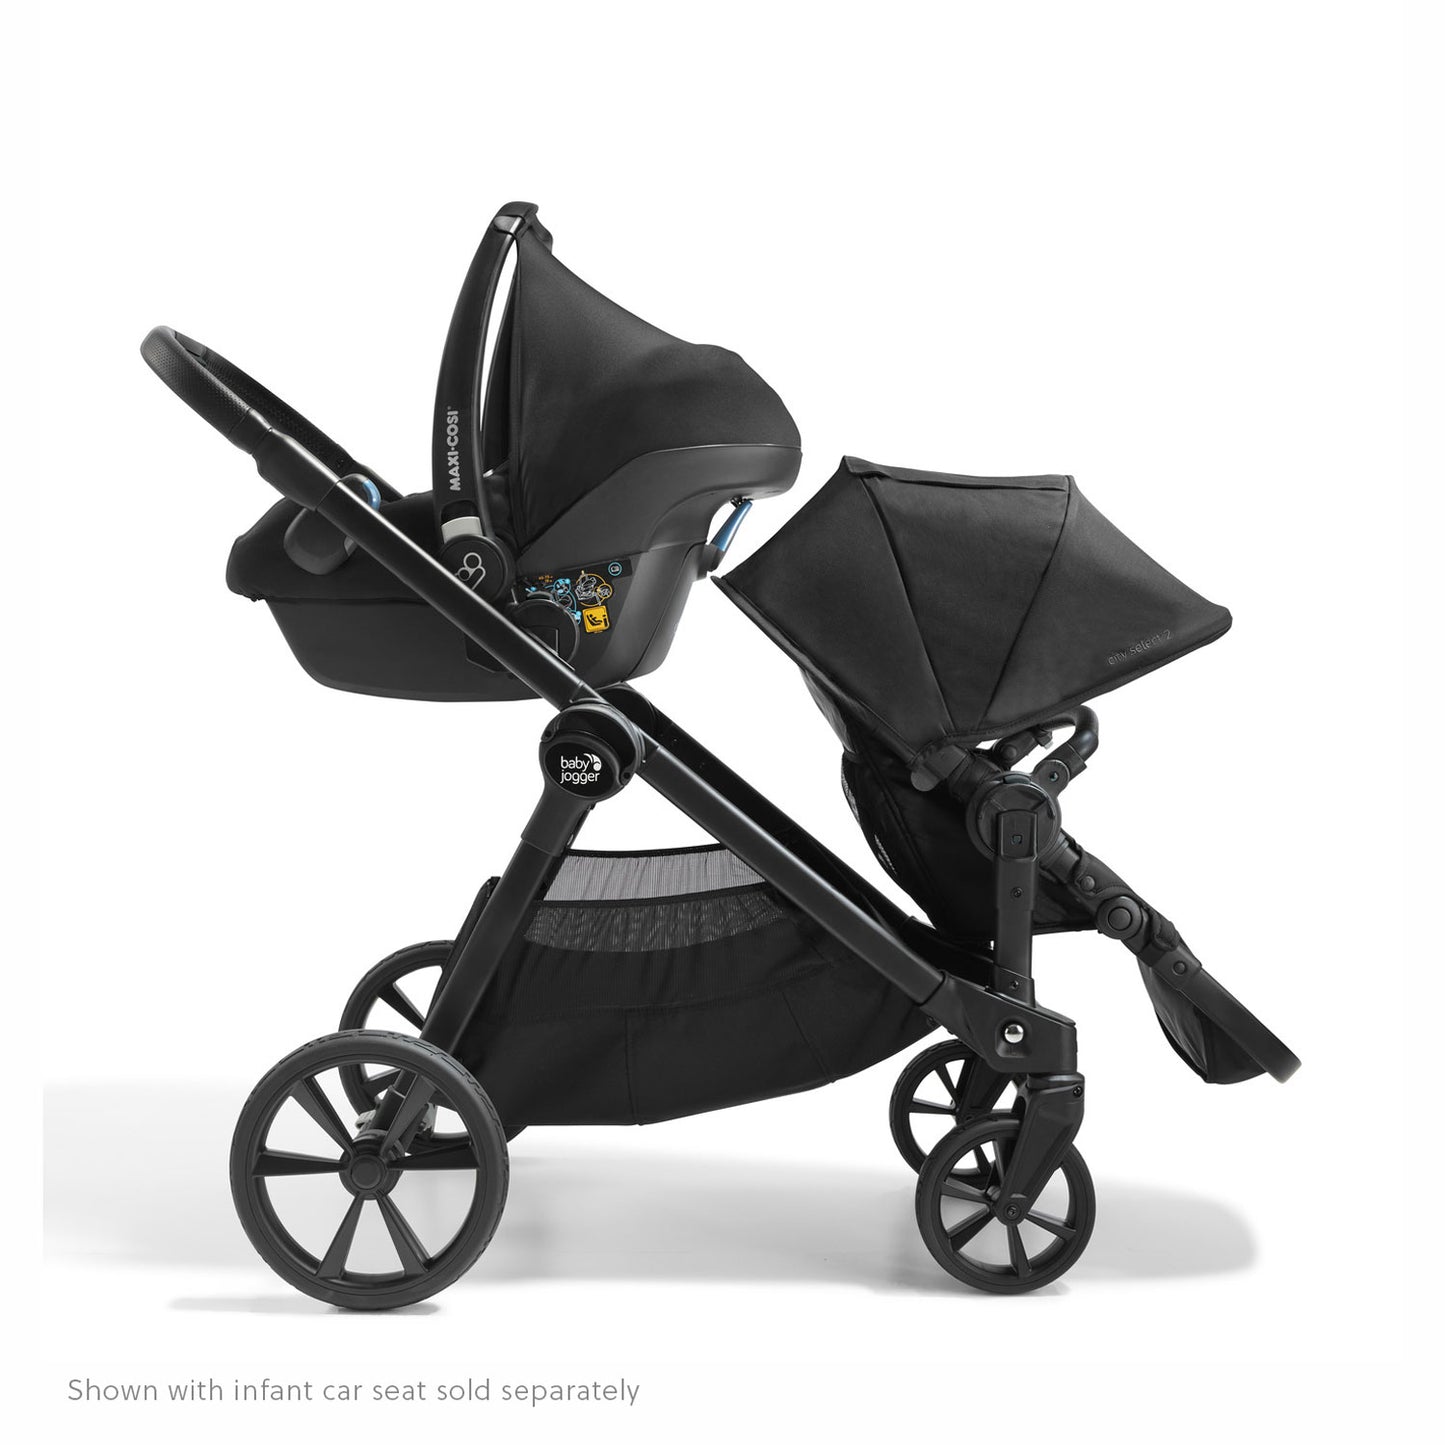 Baby Jogger City Select 2 Stroller - Lunar Black in double mode with infant car seat